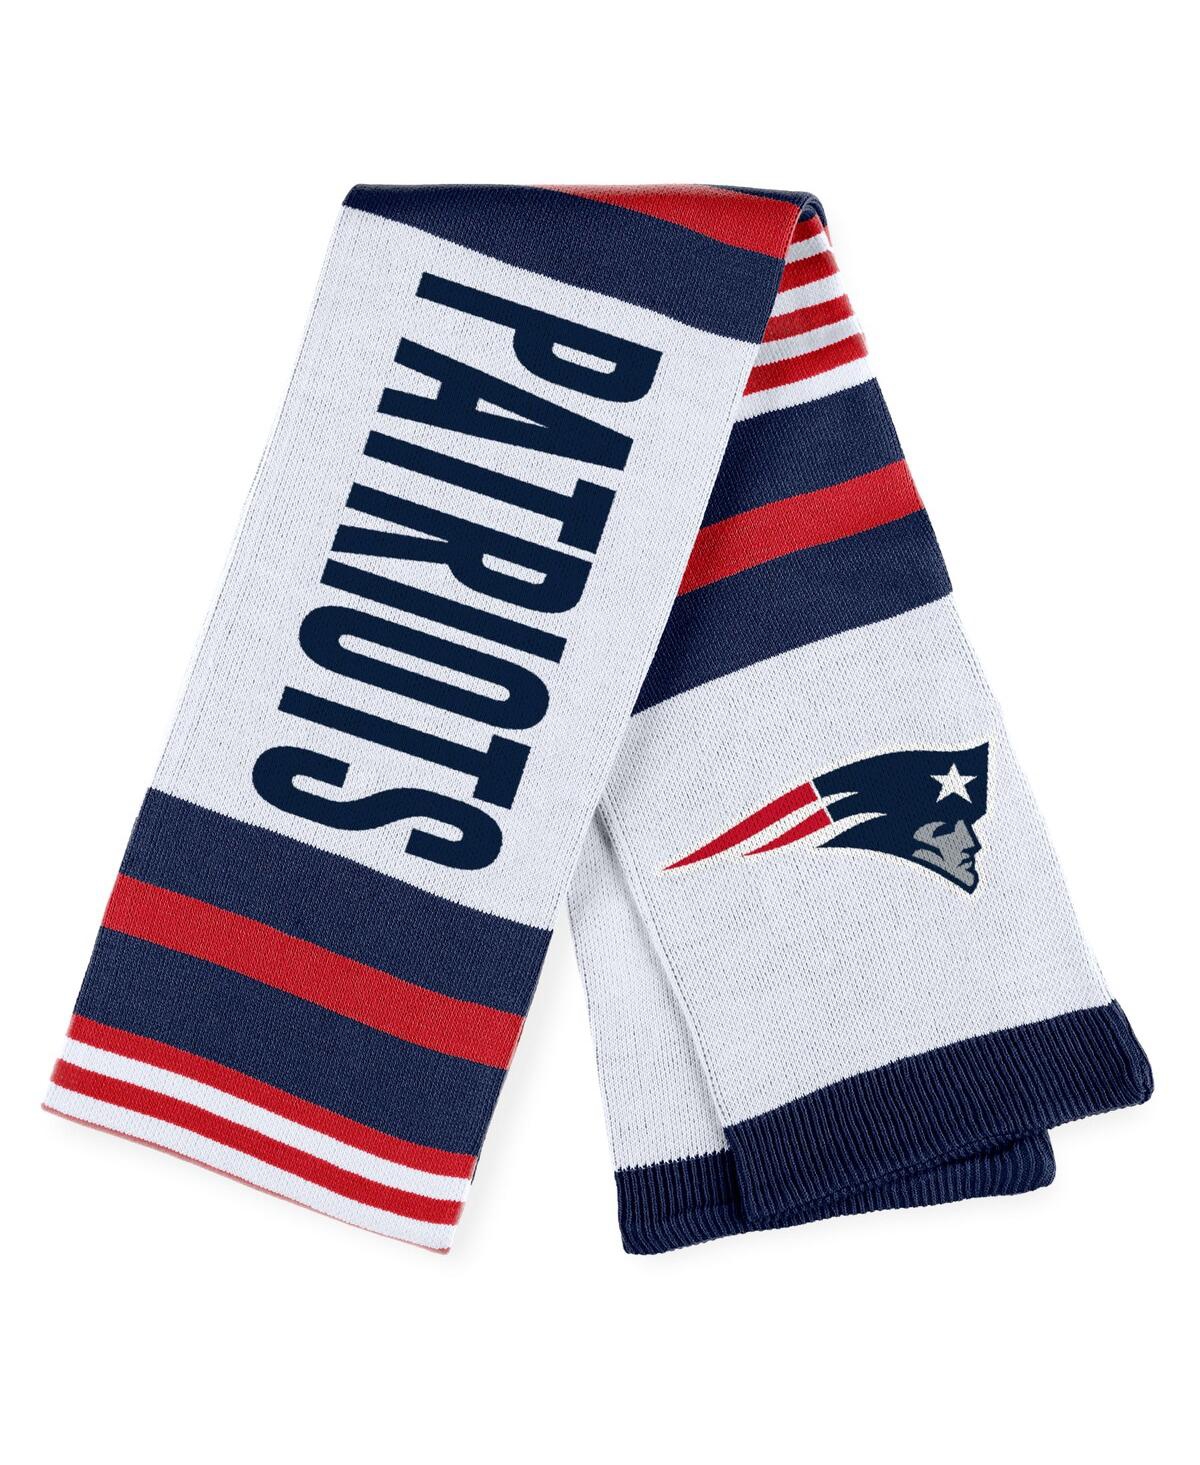 Women's Wear by Erin Andrews New England Patriots Jacquard Striped Scarf - Multi